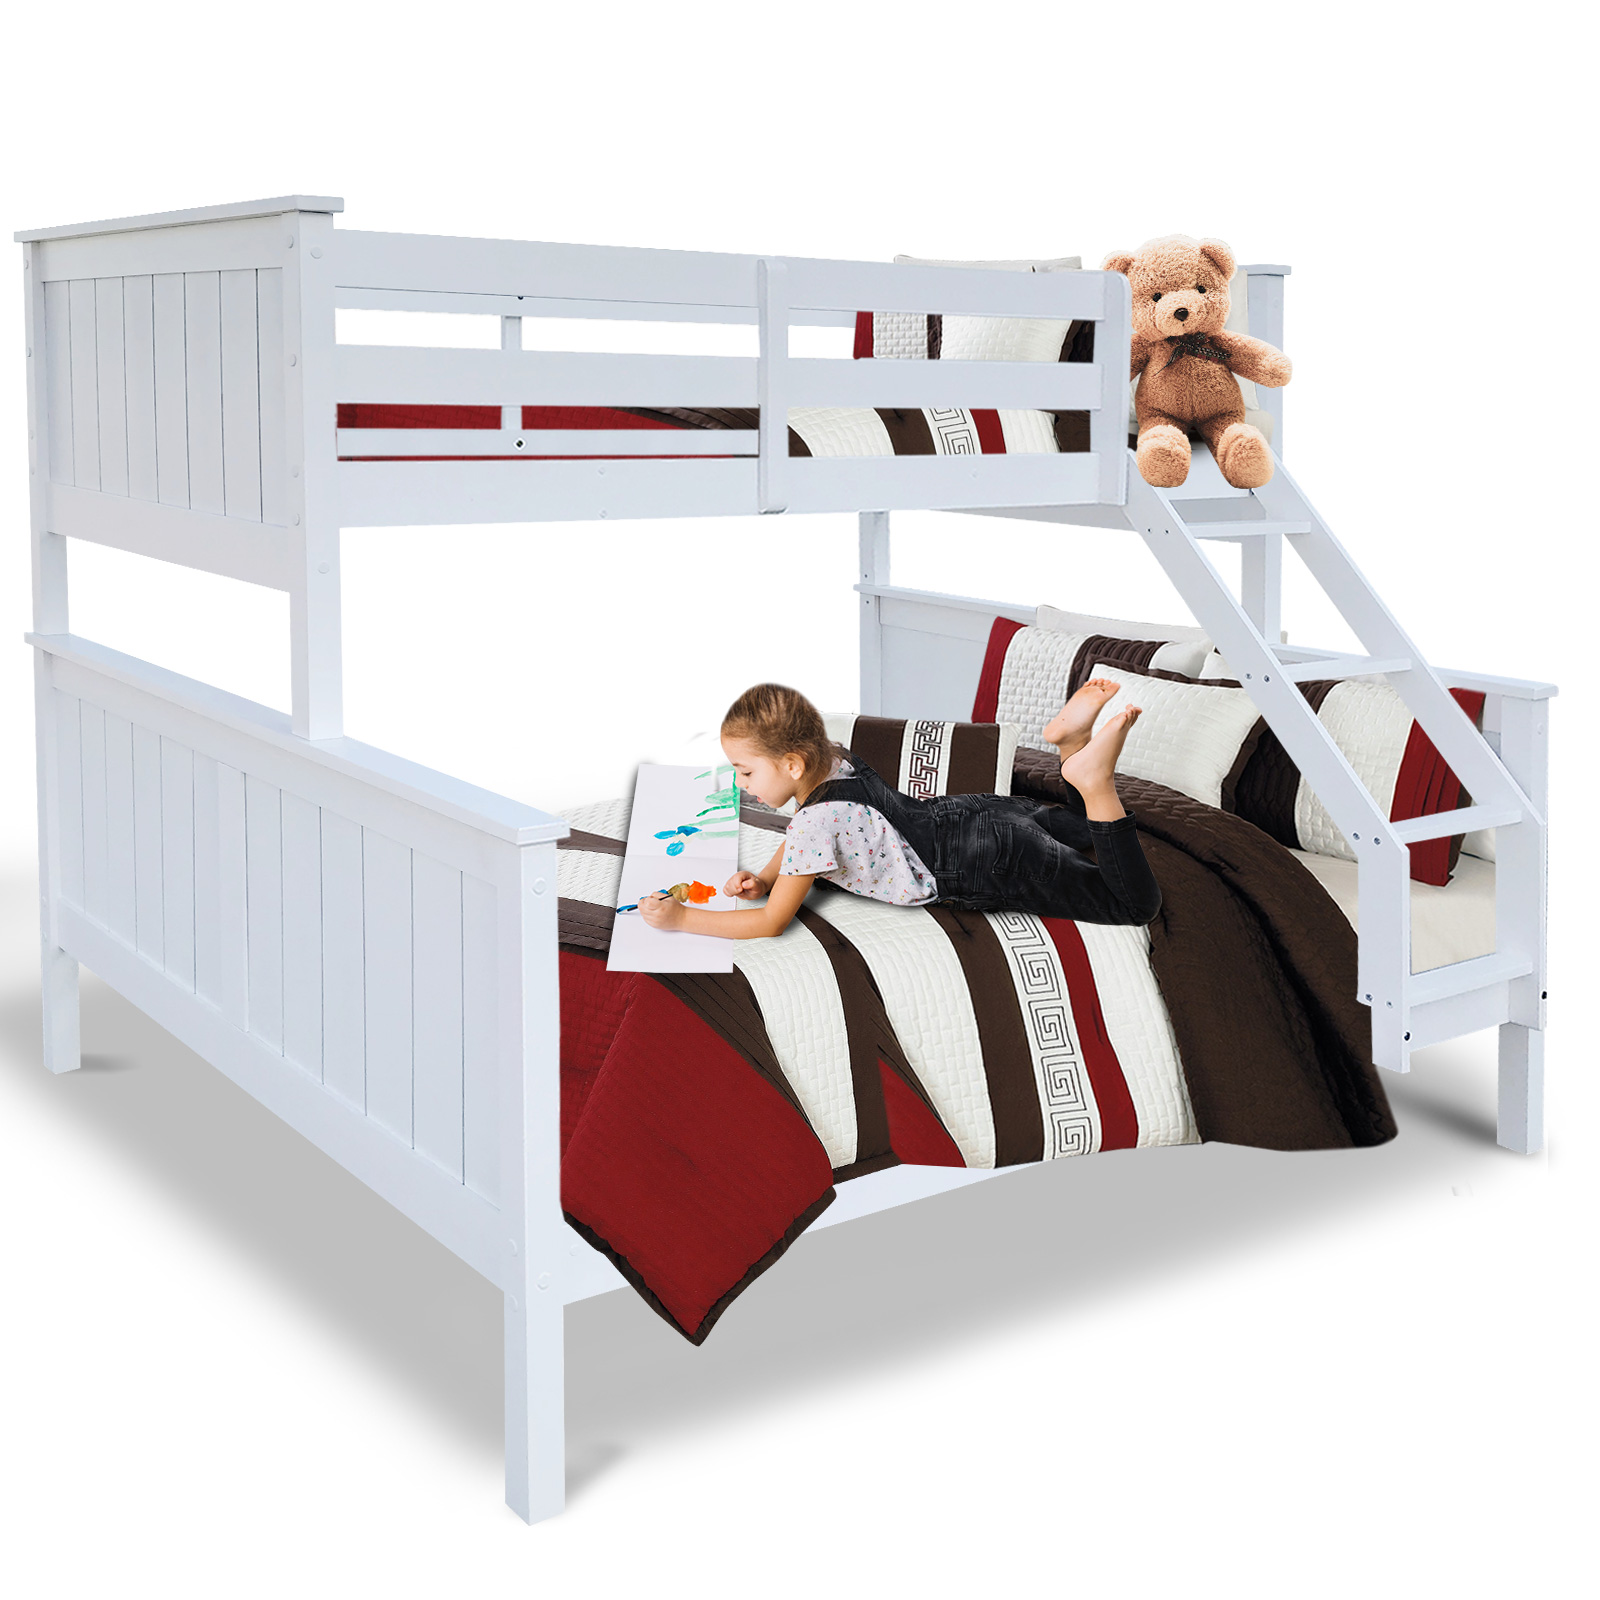 Single Over Double Triple Bunk Bed, White Bunk Beds With Double Bed